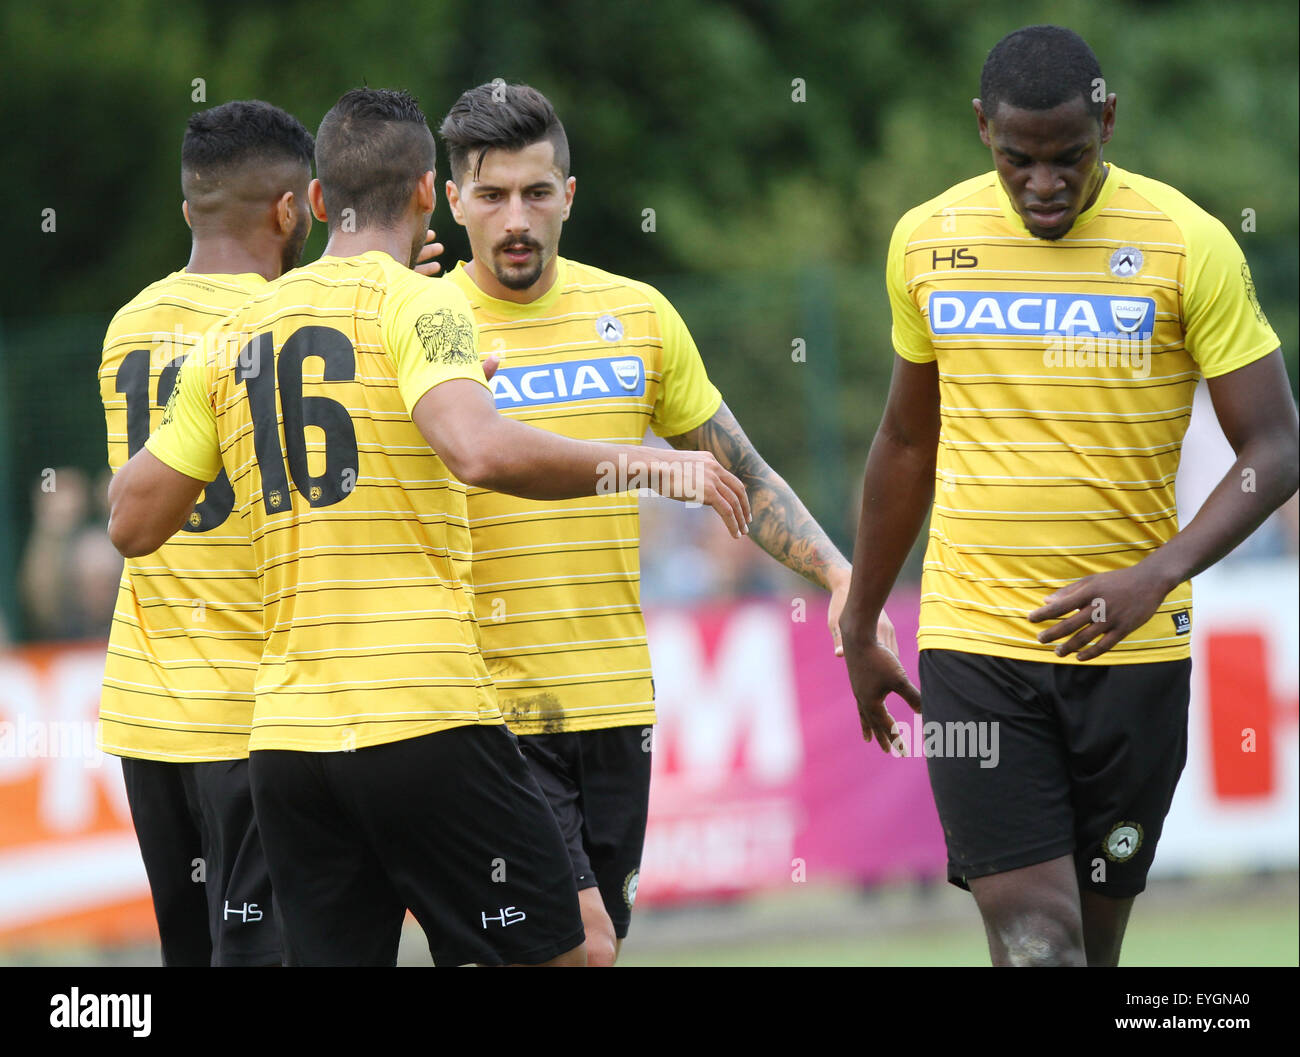 Udine, Italy. 29th July, 2015. Udinese's midfielder Panagiotis Giorgios Kone clebrate a gl with teammates Udinese's forward Duvan Zapata (R) and Udinese's defender Ali Adnan Kadhim with Udinese's forward Rodrigo Sebastian Aguirre Soto during the friendly pre-season football match Udinese Calcio v Clodiense on 29th July, 2015 at Bruseschi training center in Udine, Italy. Credit:  Andrea Spinelli/Alamy Live News Stock Photo